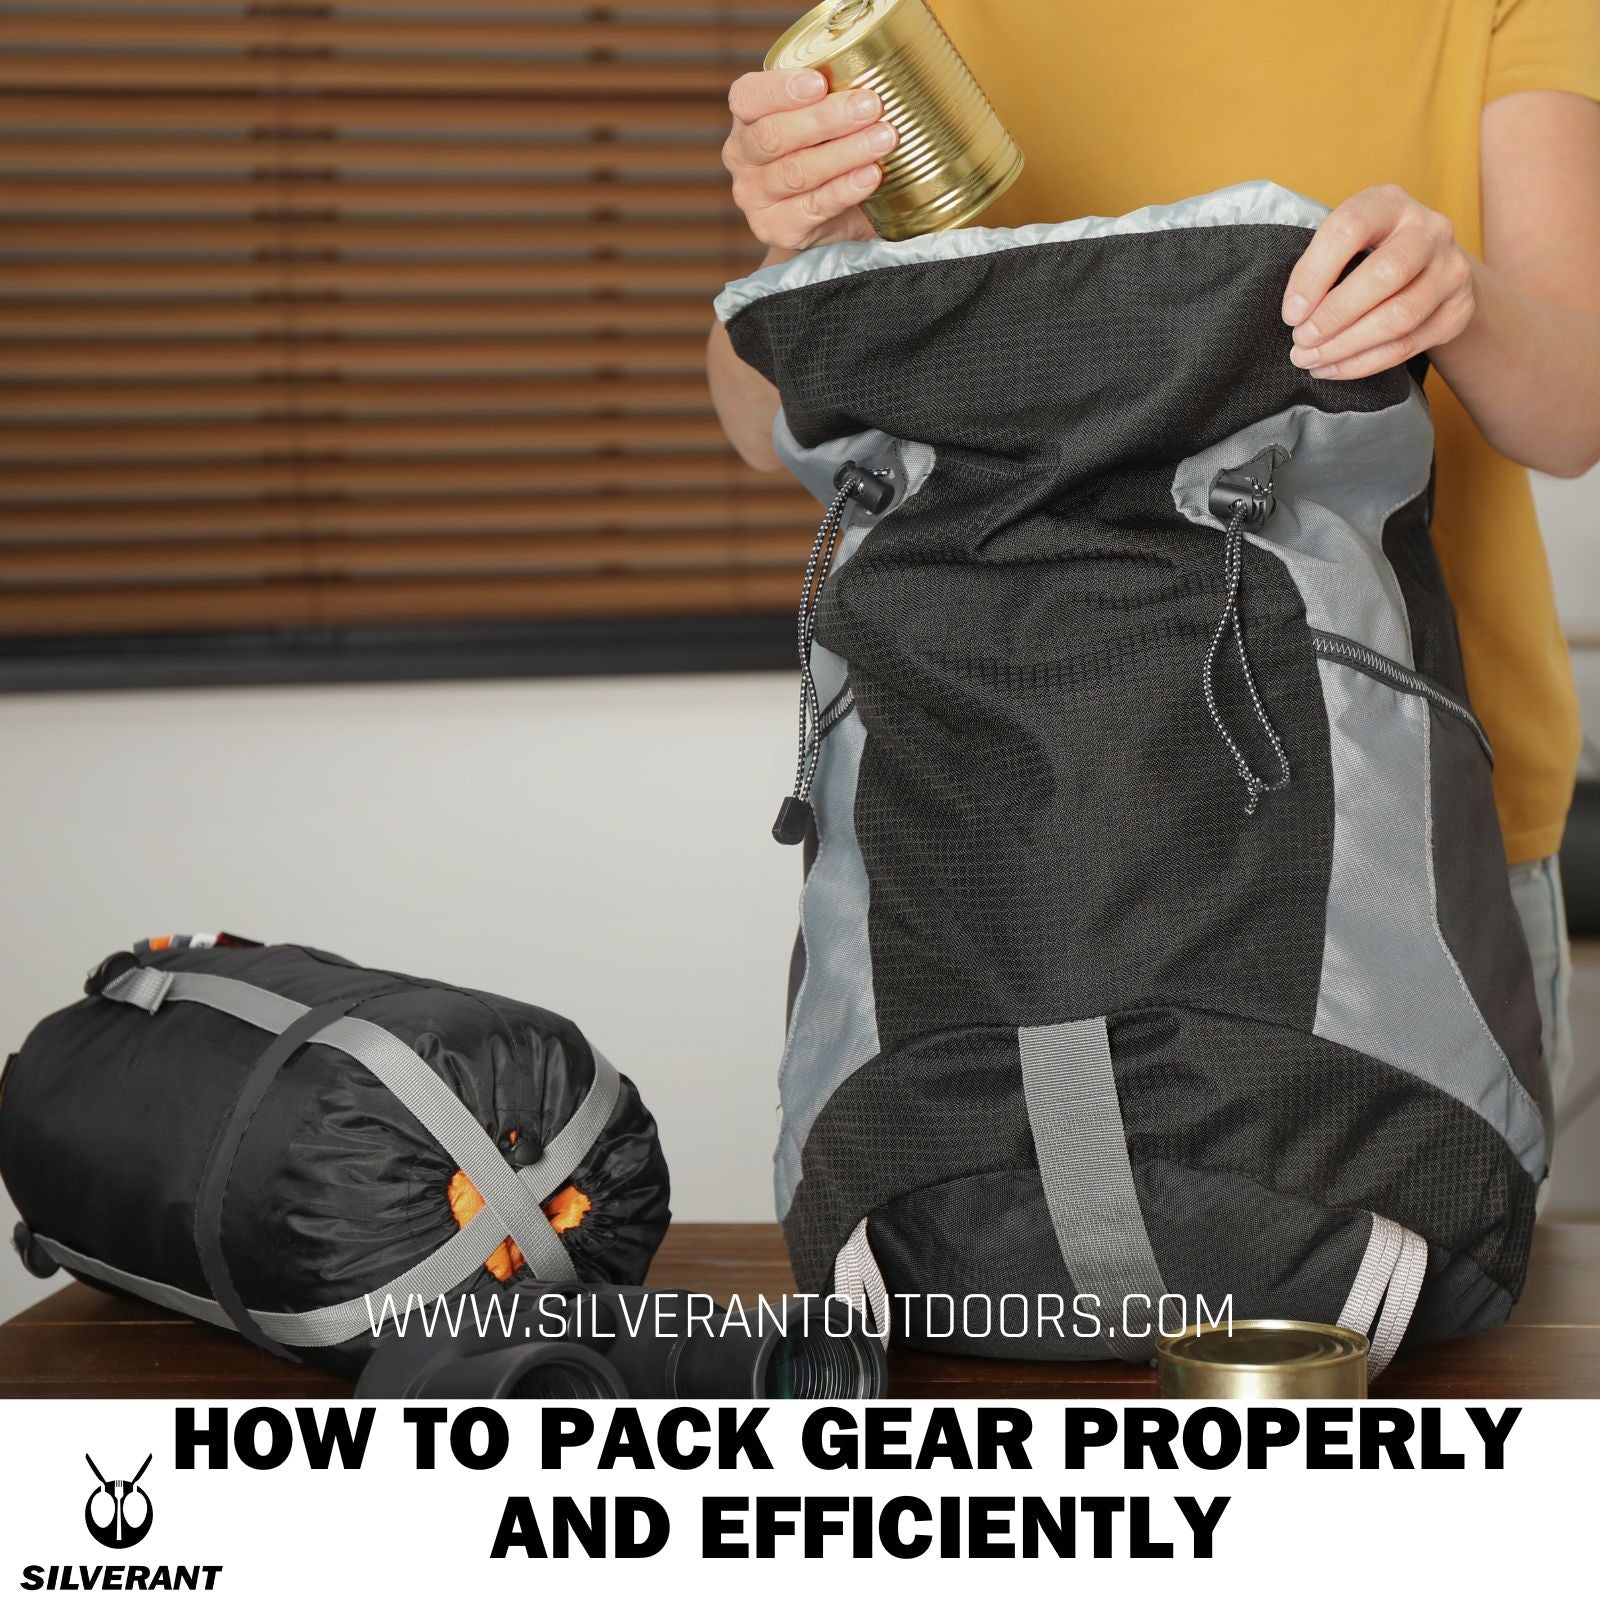 How to pack gear properly and efficiently